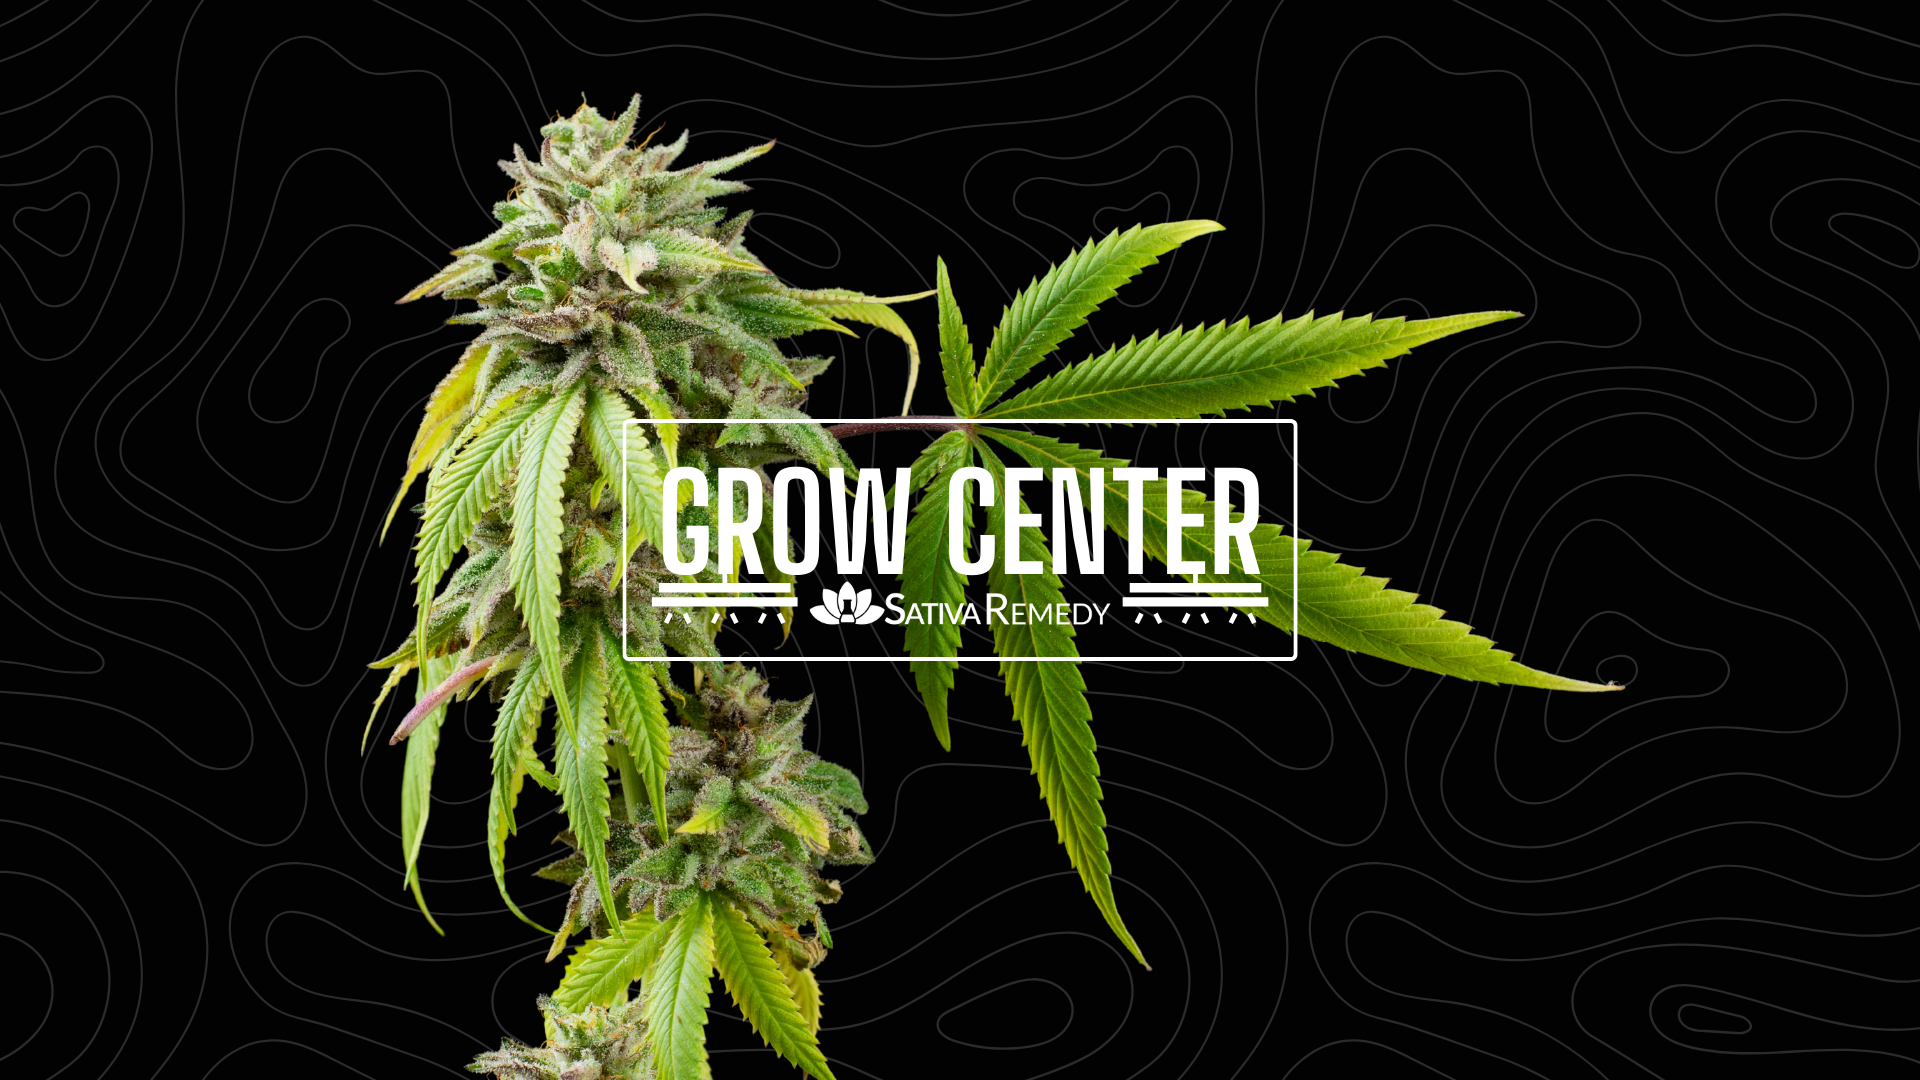 What is the Sativa Remedy Grow Center?